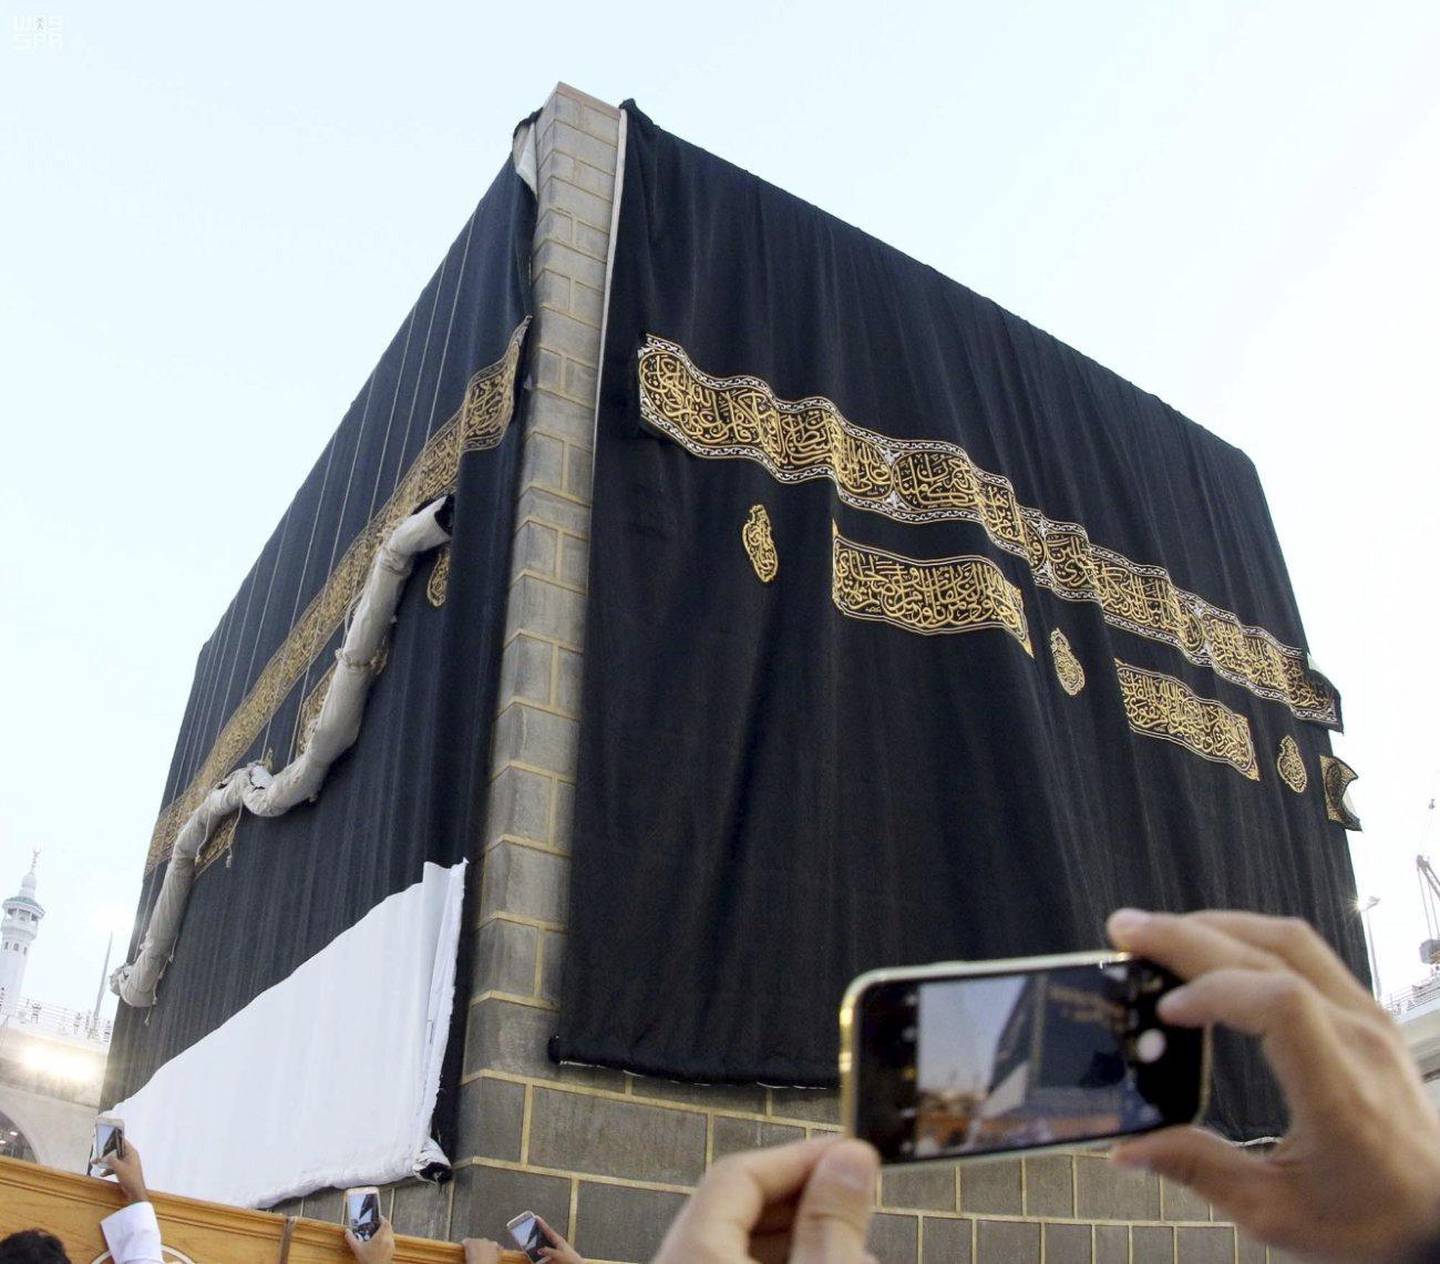 The Kaaba's kiswah being replaced. Saudi Press Agency